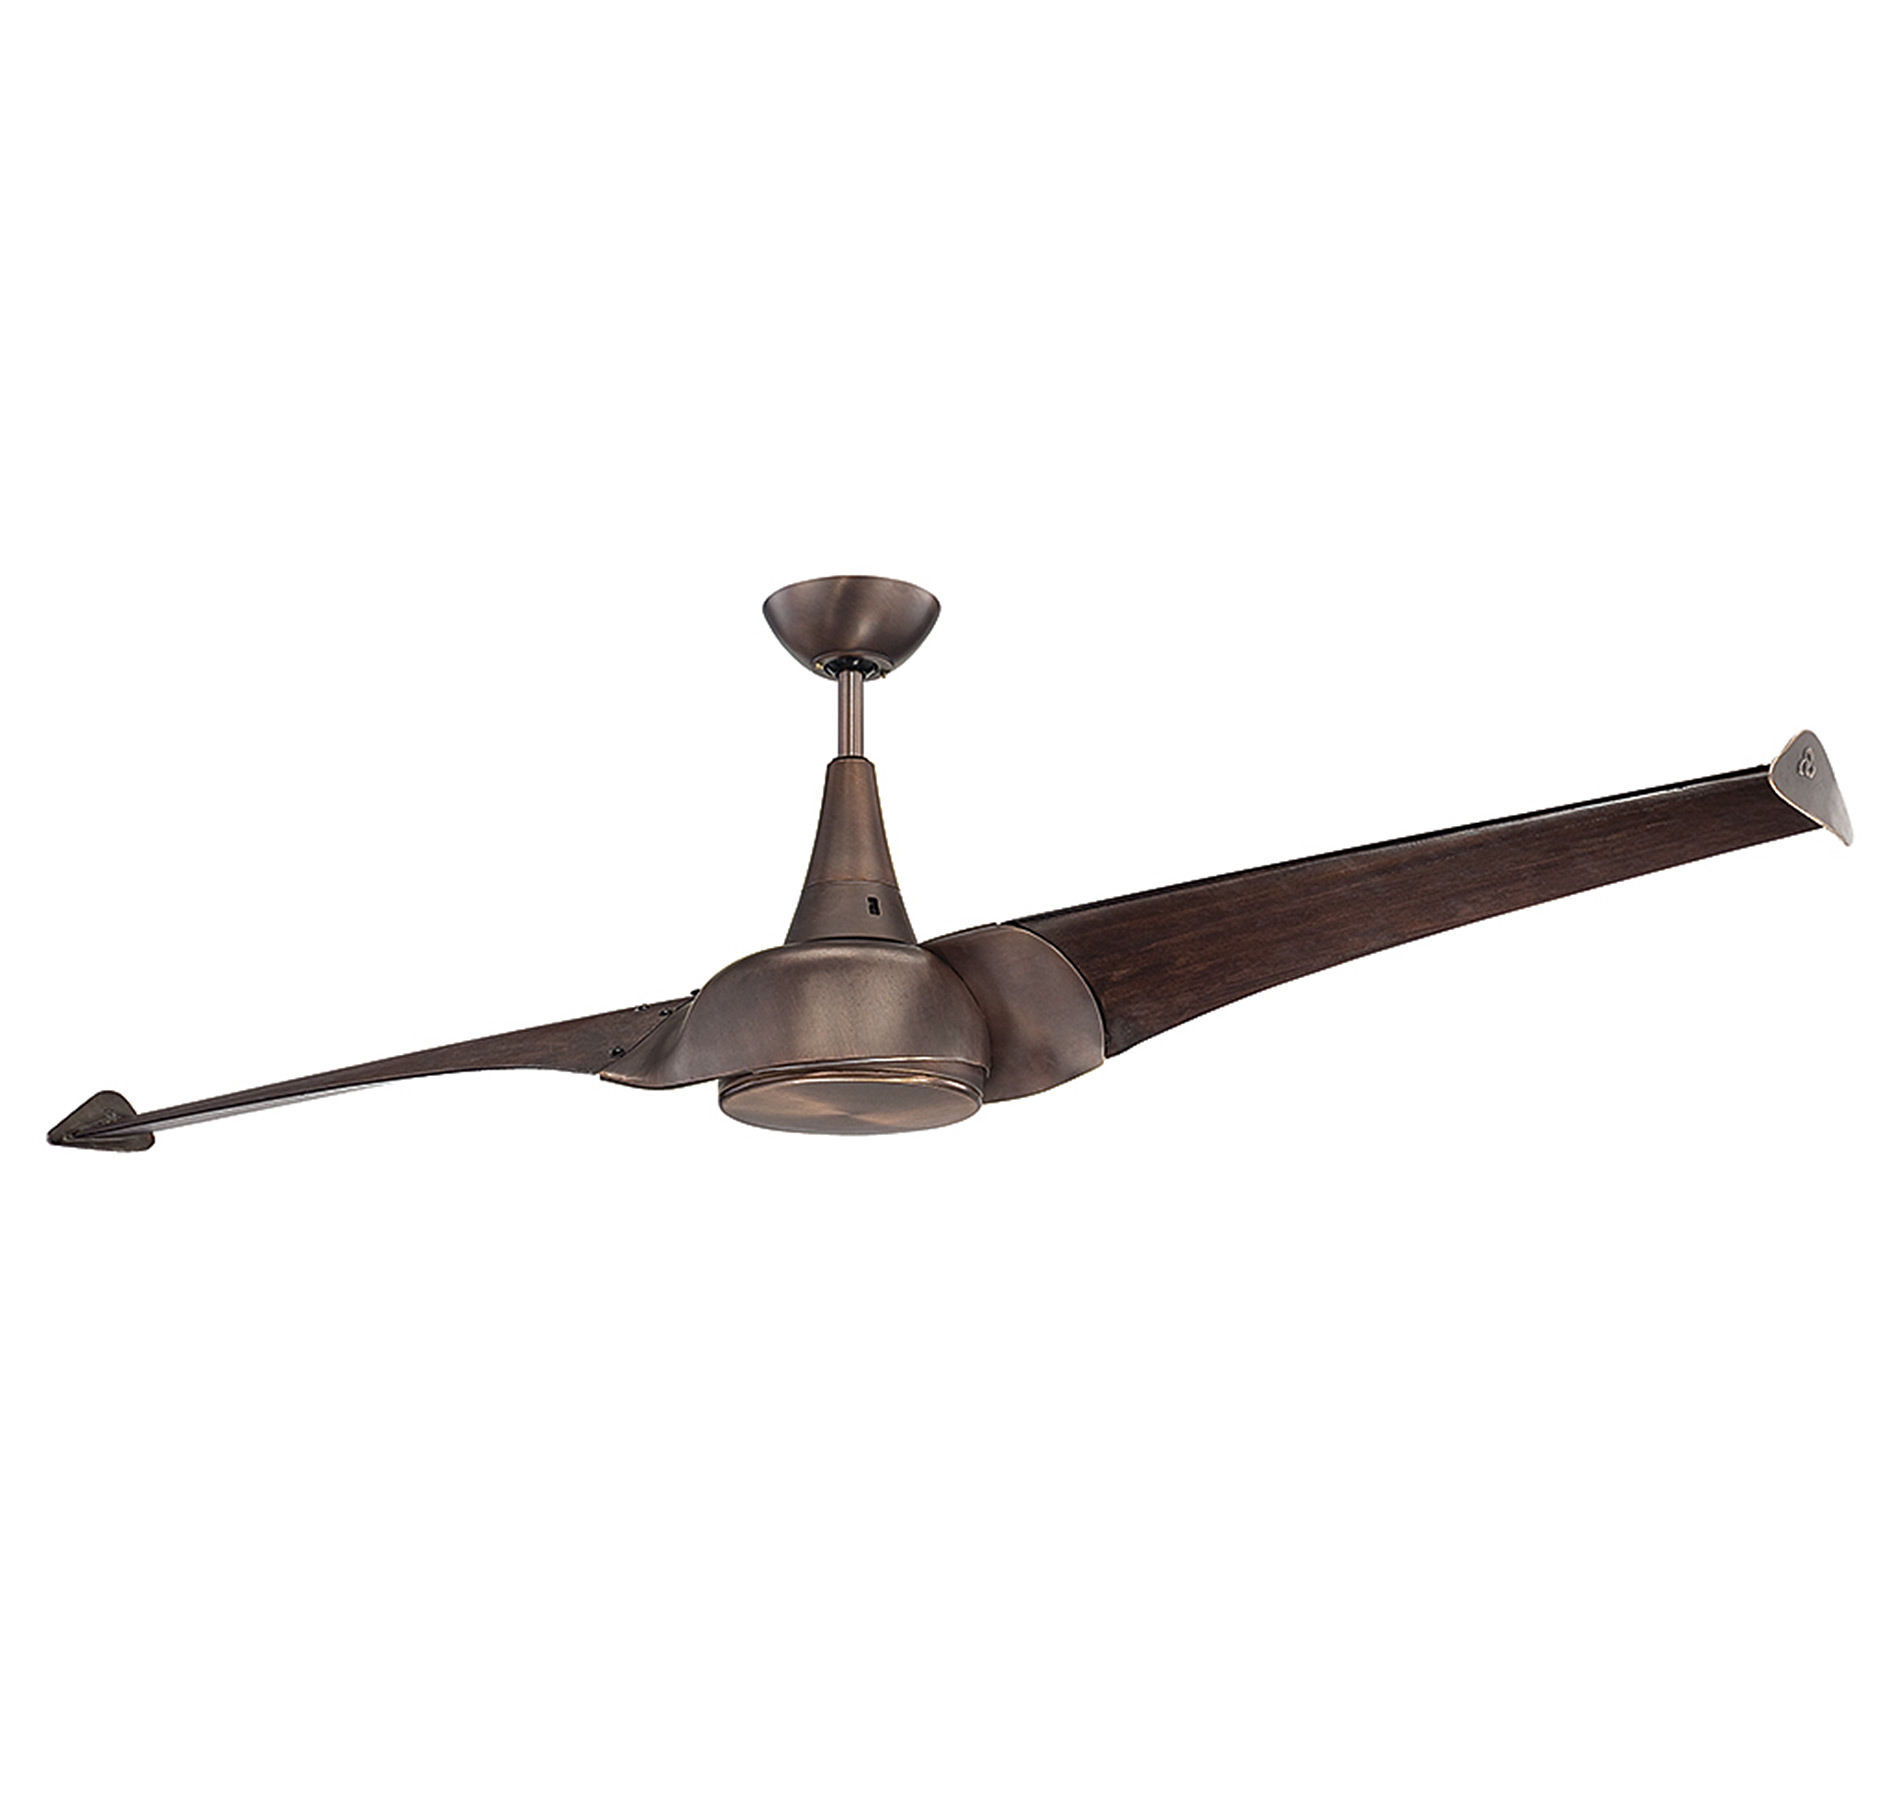 2 blade ceiling fans photo - 1